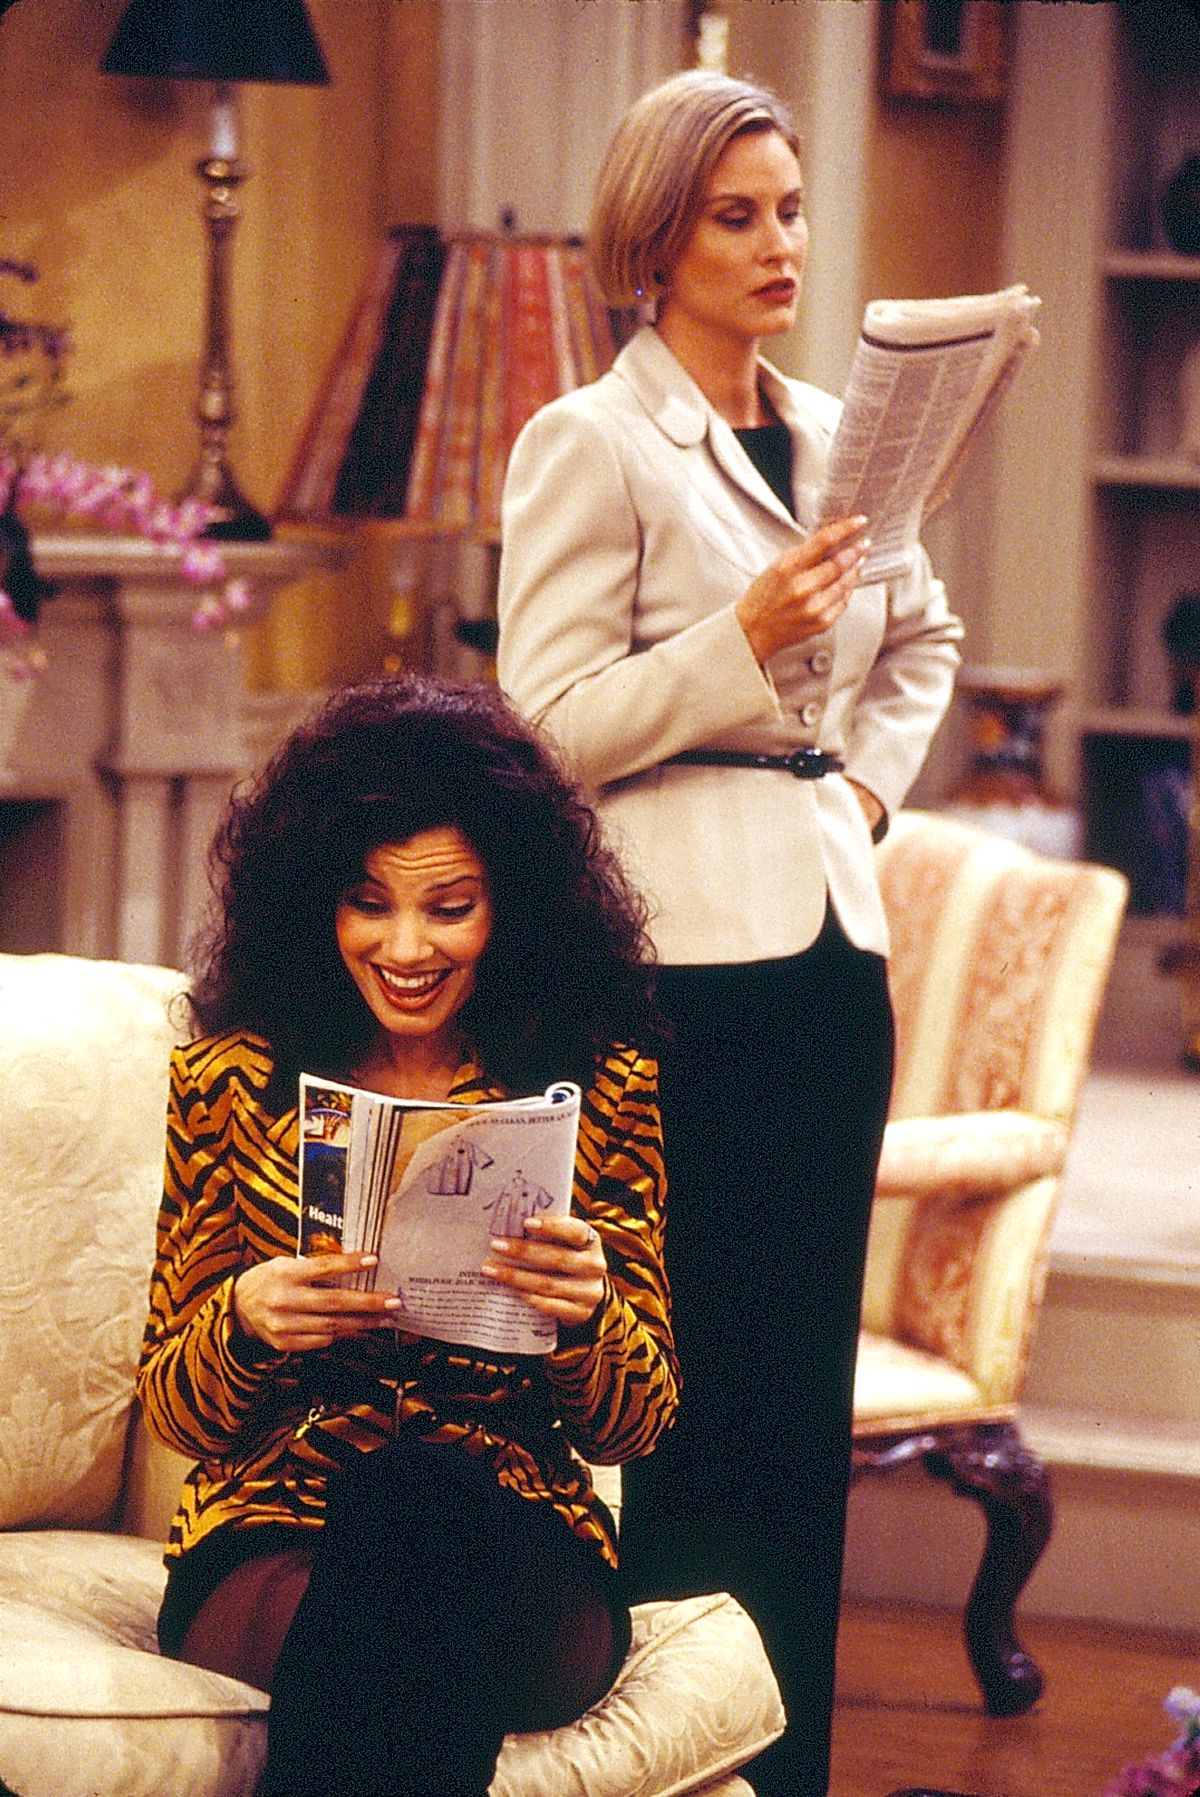 On the set of The Nanny, Fran Drescher (as Fran Fine) sits on the couch and reads a magazine, while Lauren Lane (as Sissy Babcock) stands up and holds a newspaper.